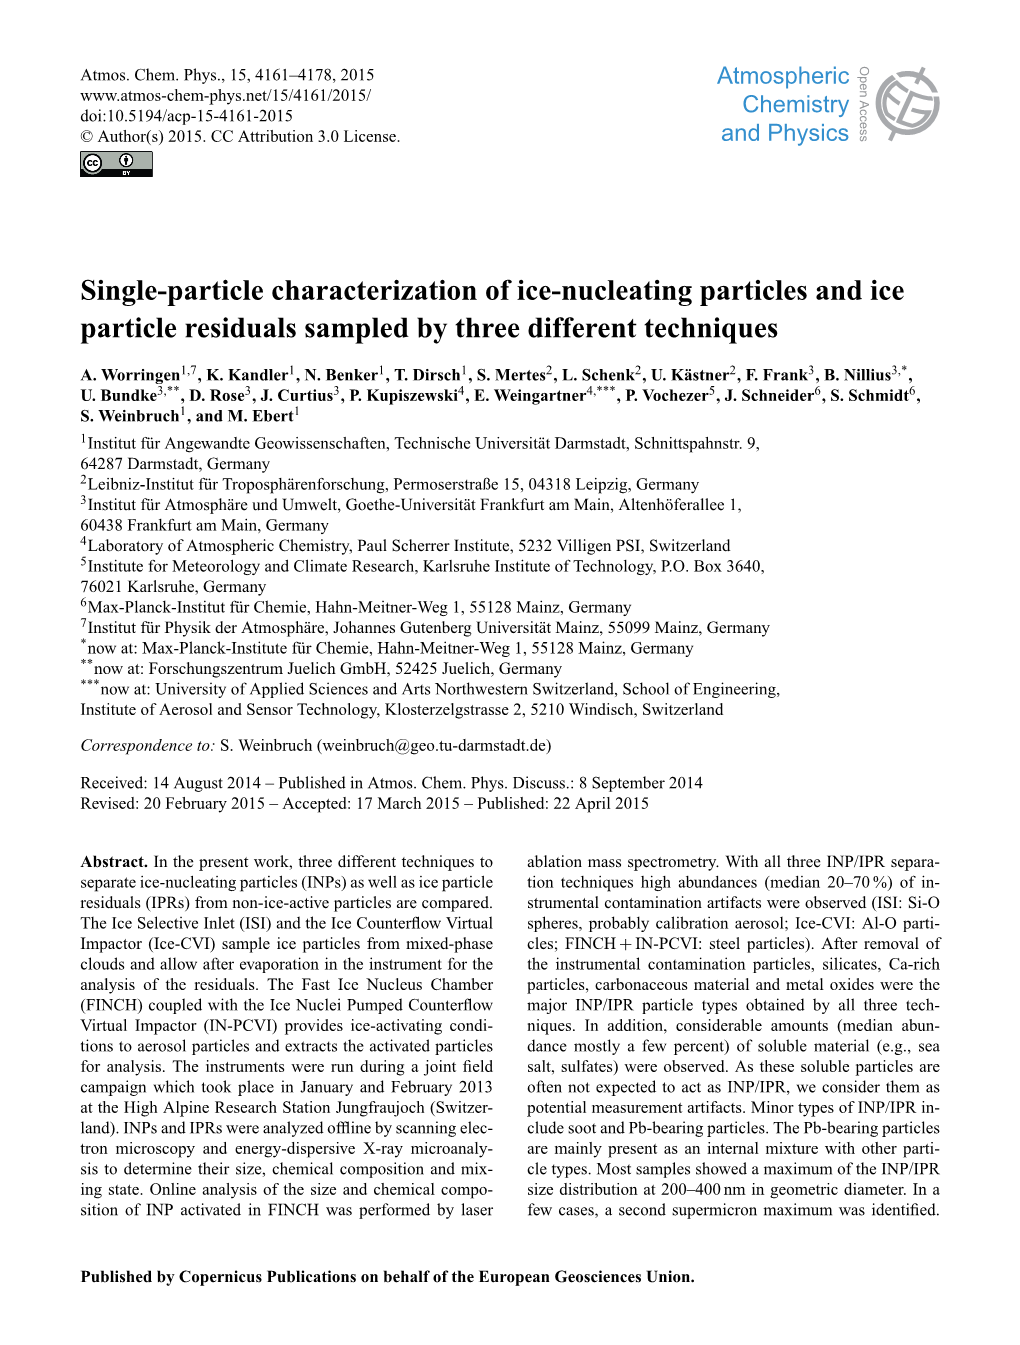 Single-Particle Characterization of Ice-Nucleating Particles and Ice Particle Residuals Sampled by Three Different Techniques